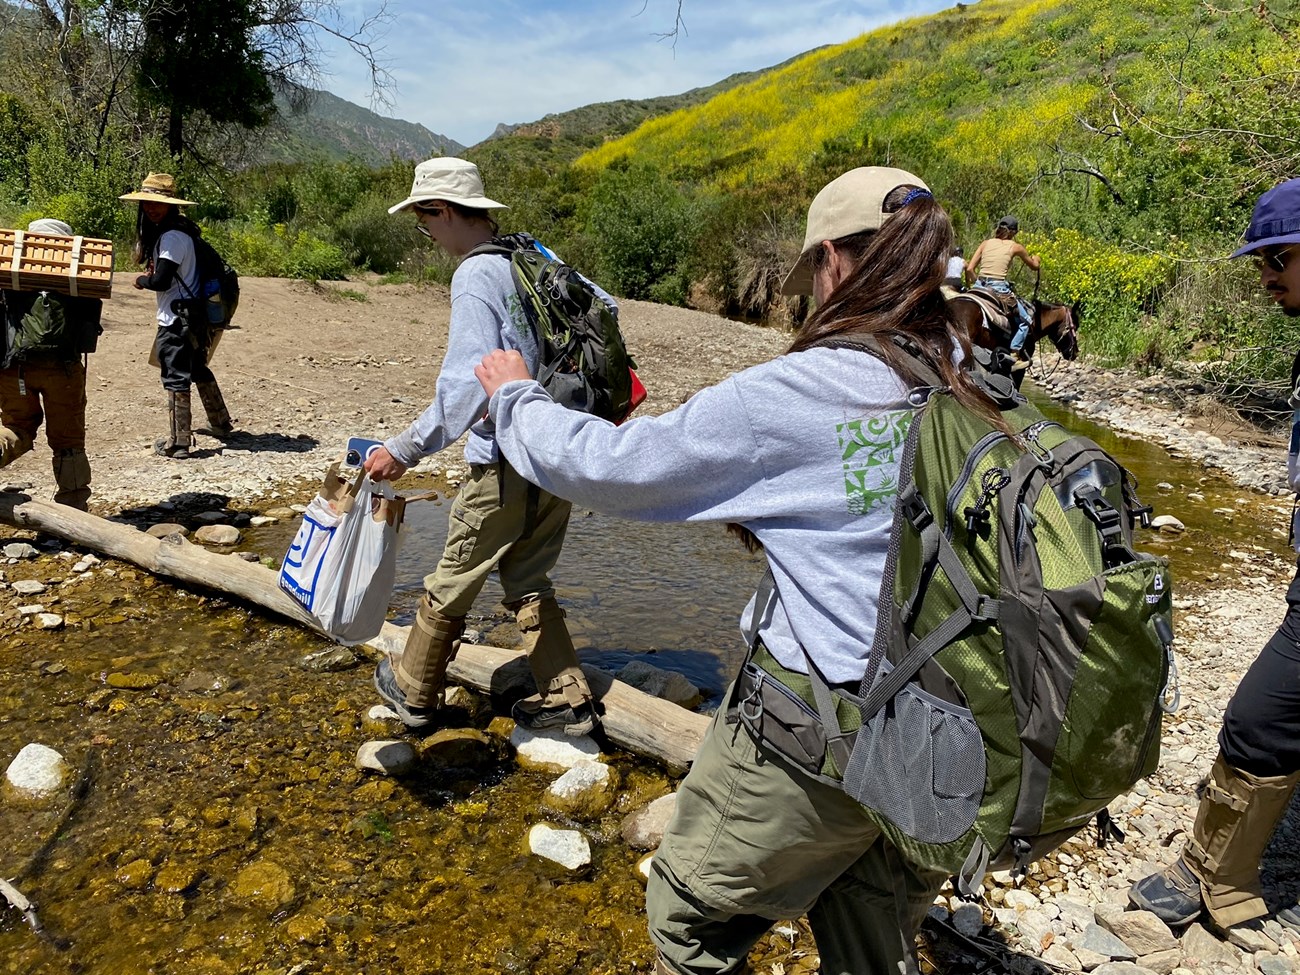 Interns crossing the stream on their way to the seed collecting site.